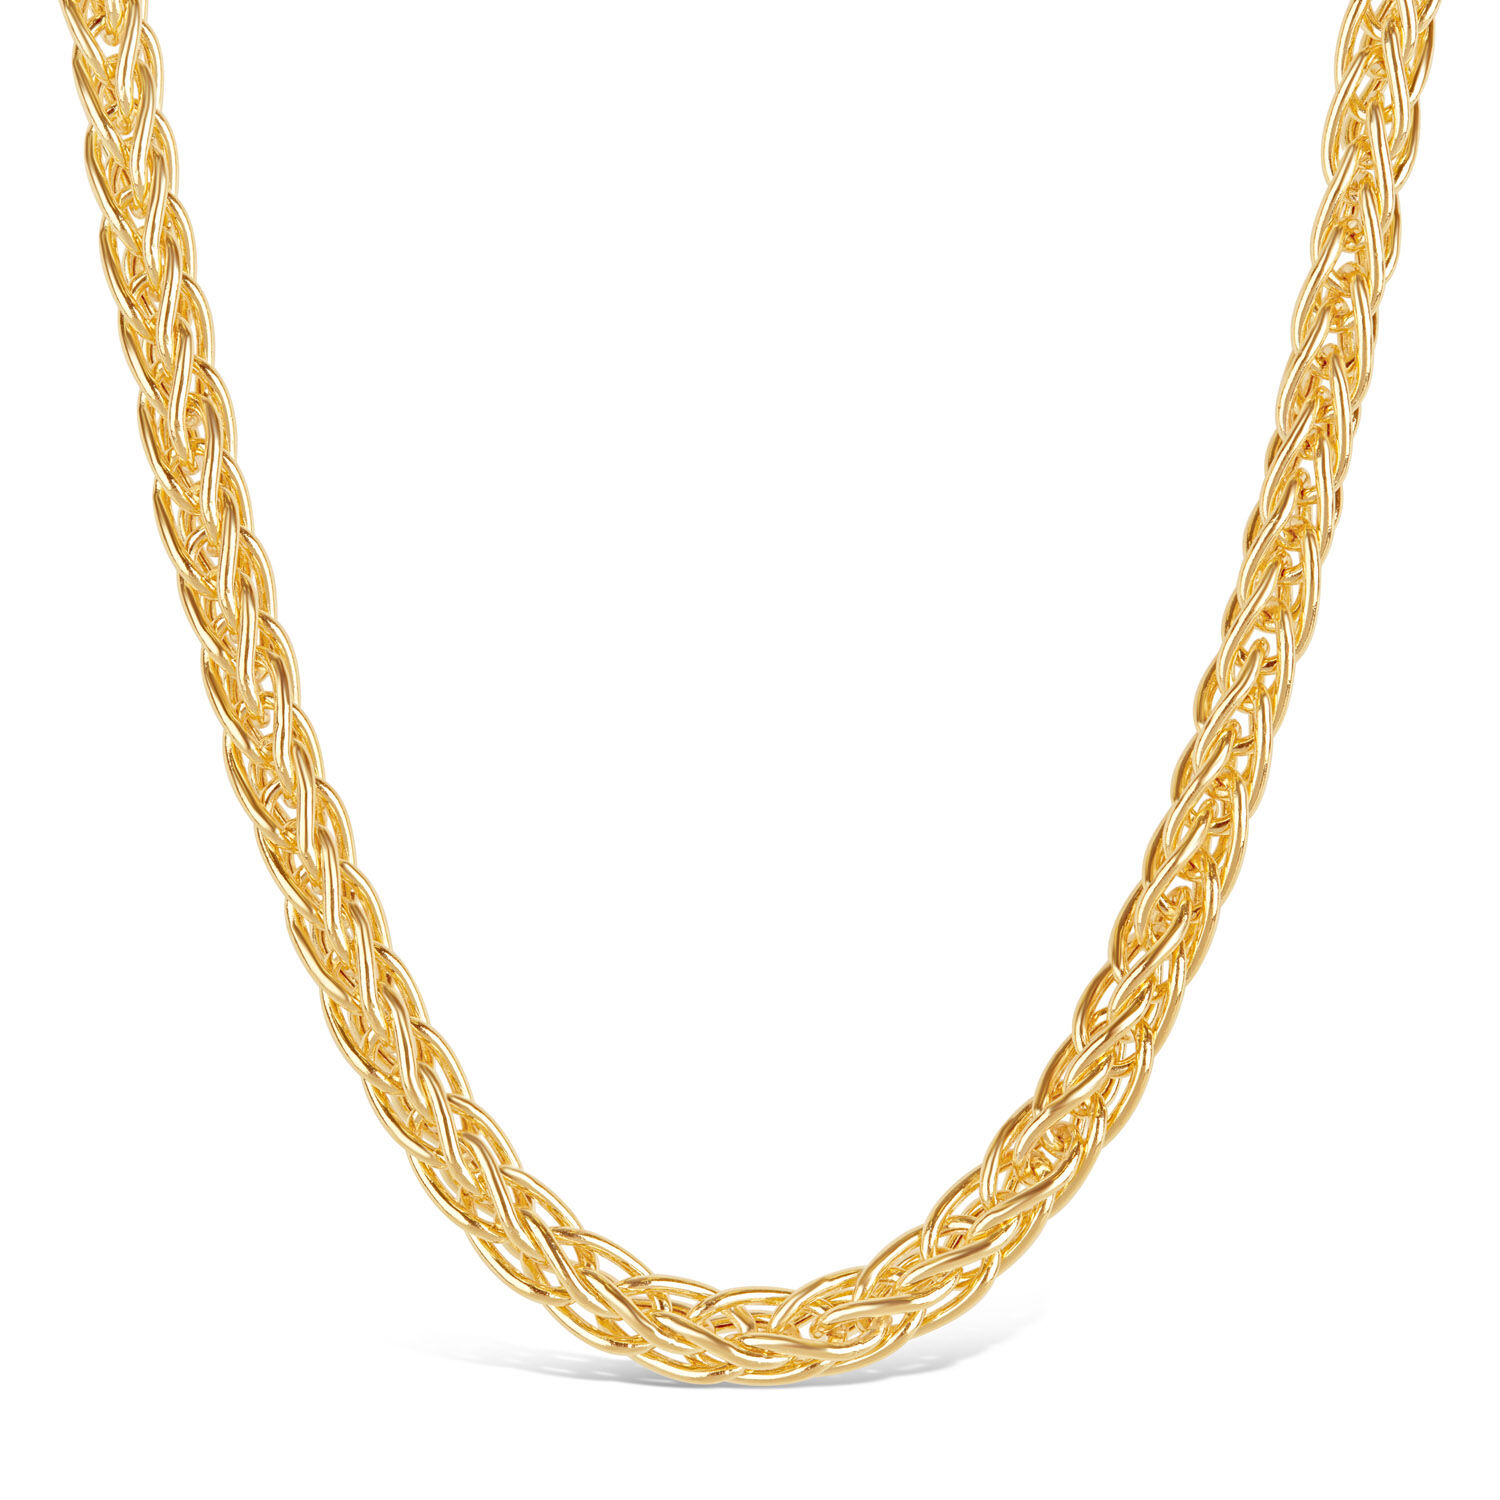 Zales Previously Owned - Men's 4.5mm Spiga Chain Necklace in 10K Gold - 22